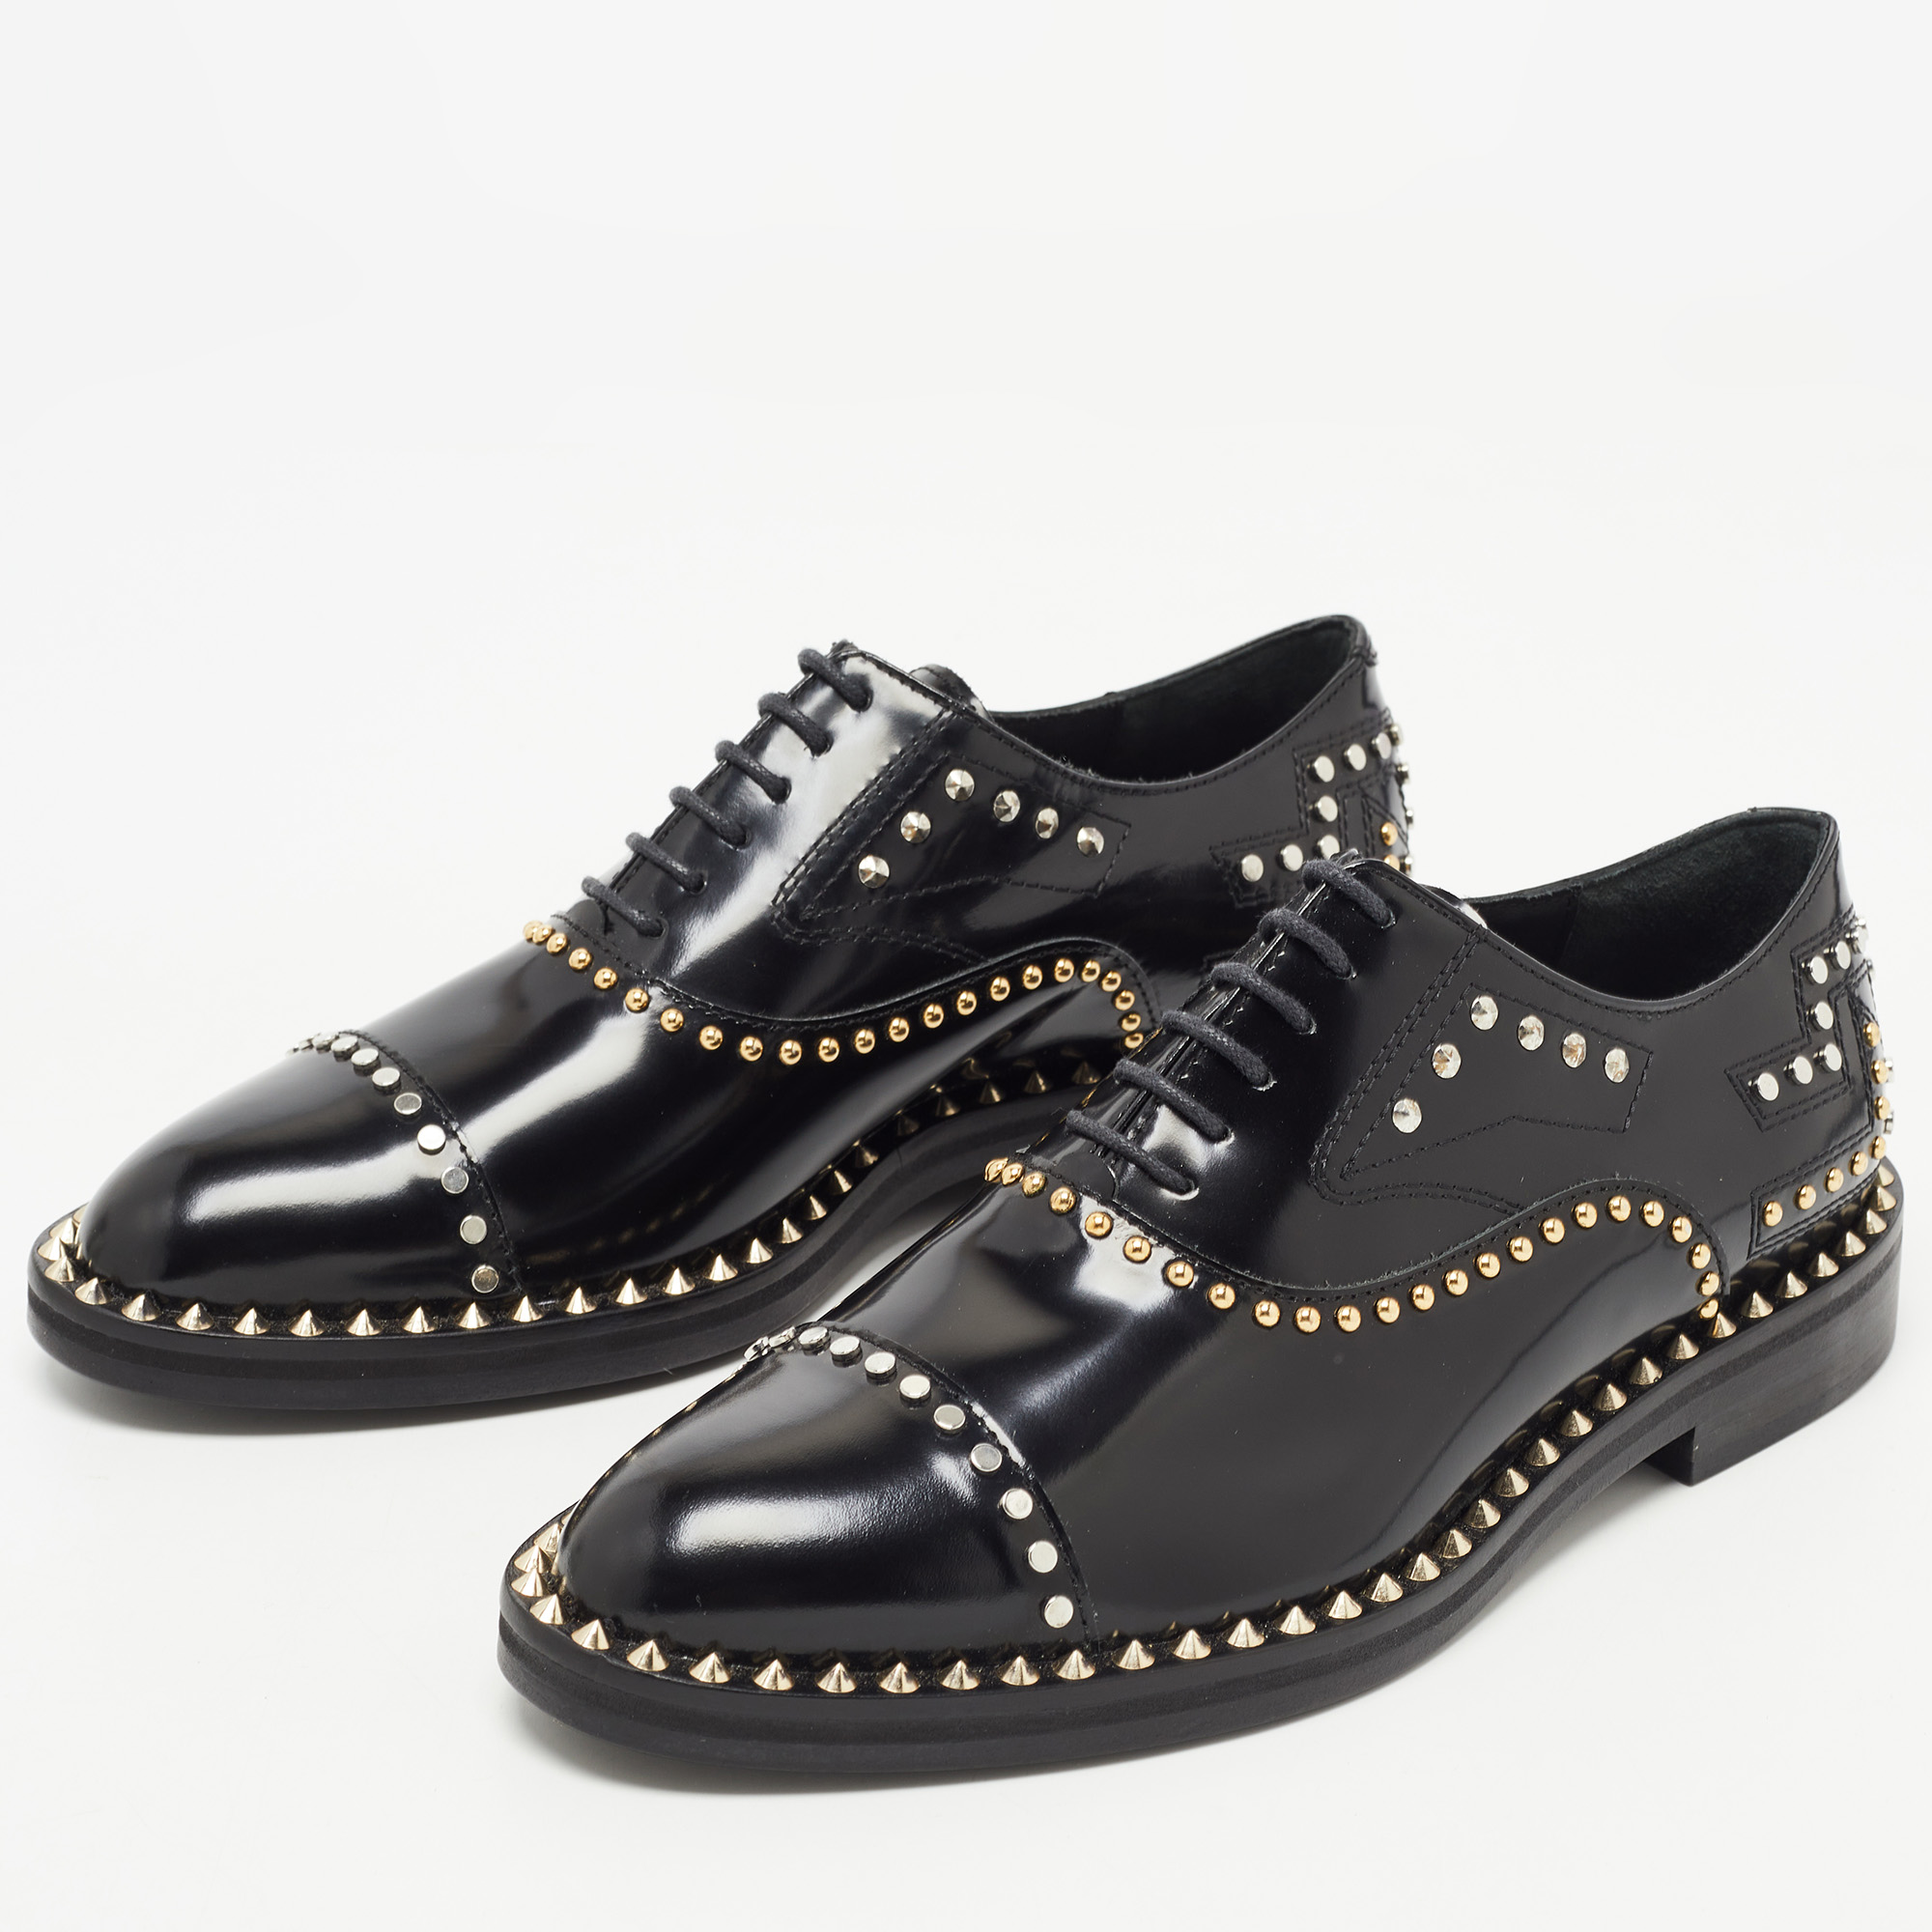 

Zadig & Voltaire Black Leather Studded Youth Clous Oxfords Size